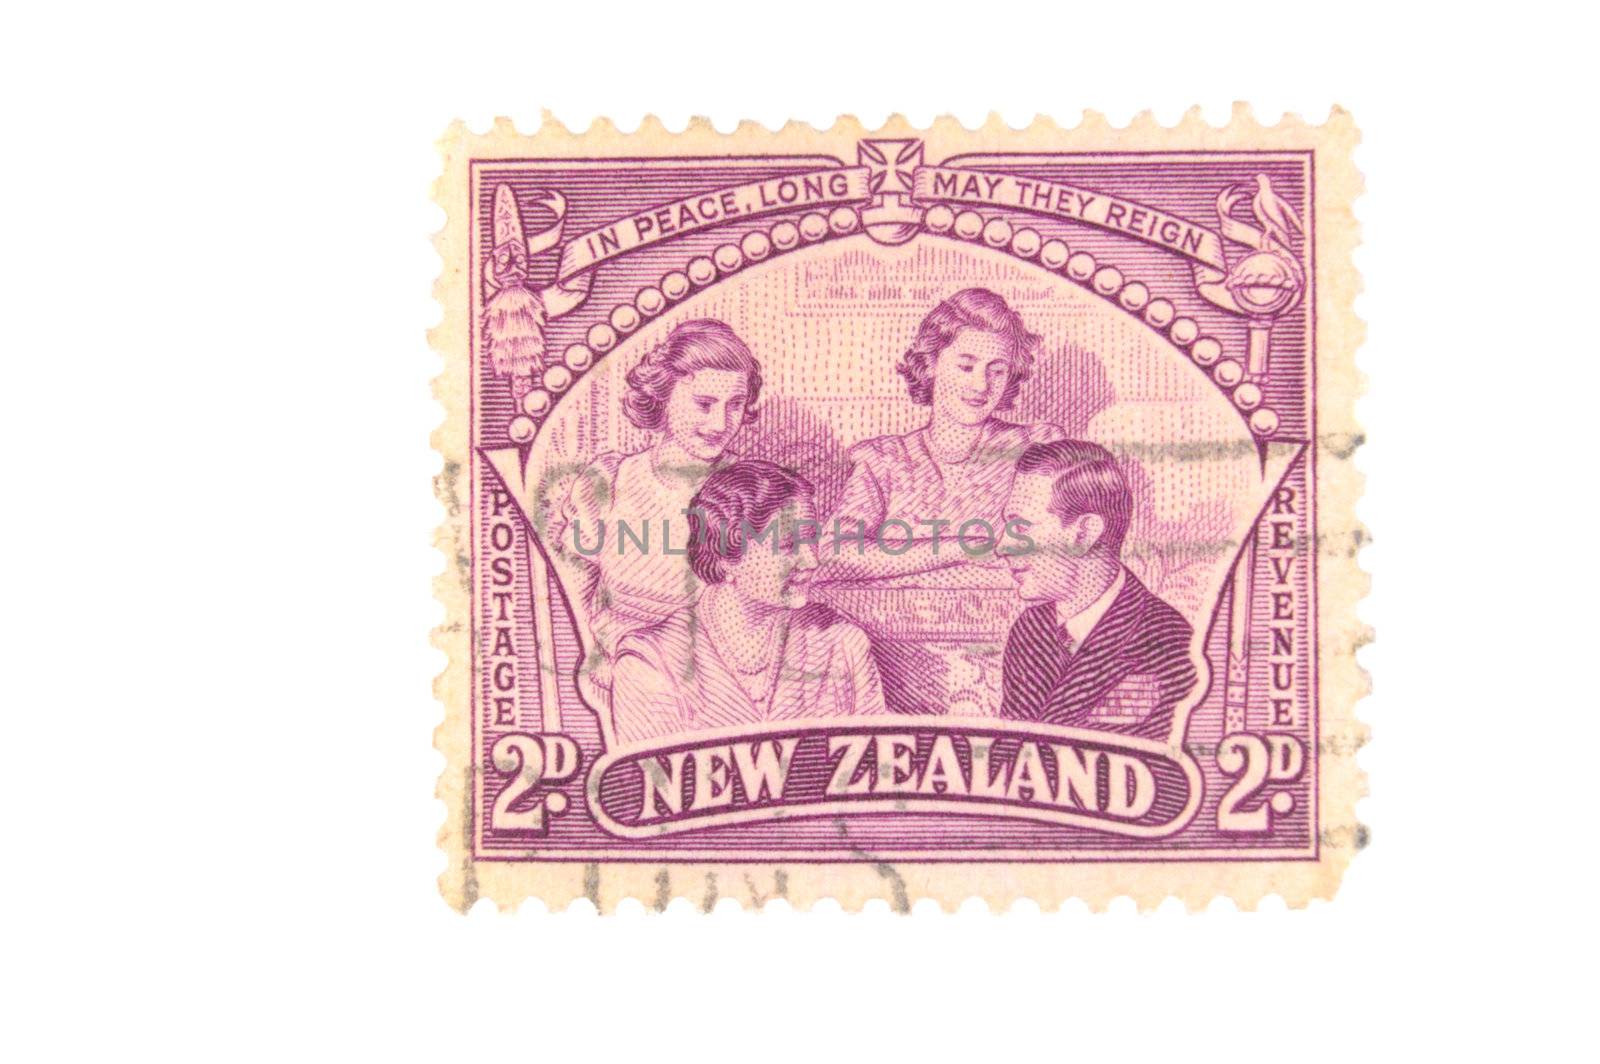 Canada - Circa 1948 : A vintage New Zealand postage stamp image of King George, Queen, Princesses Elizabeth and Margaret value of 2 pence, series circa 1948